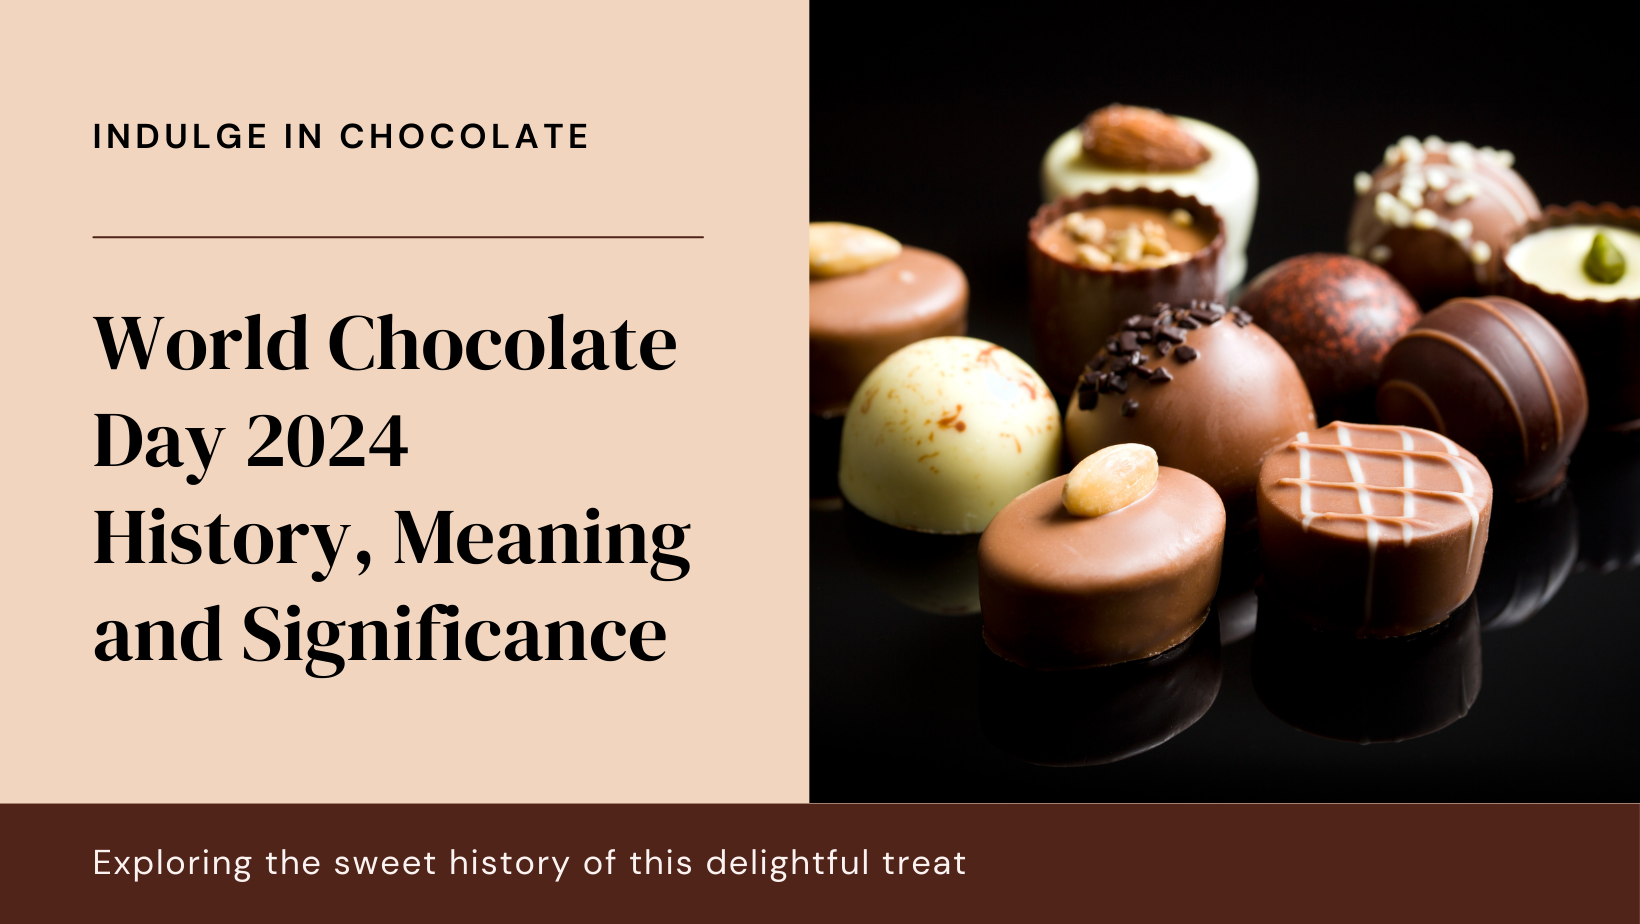 World Chocolate Day 2024: History, Meaning and Significance